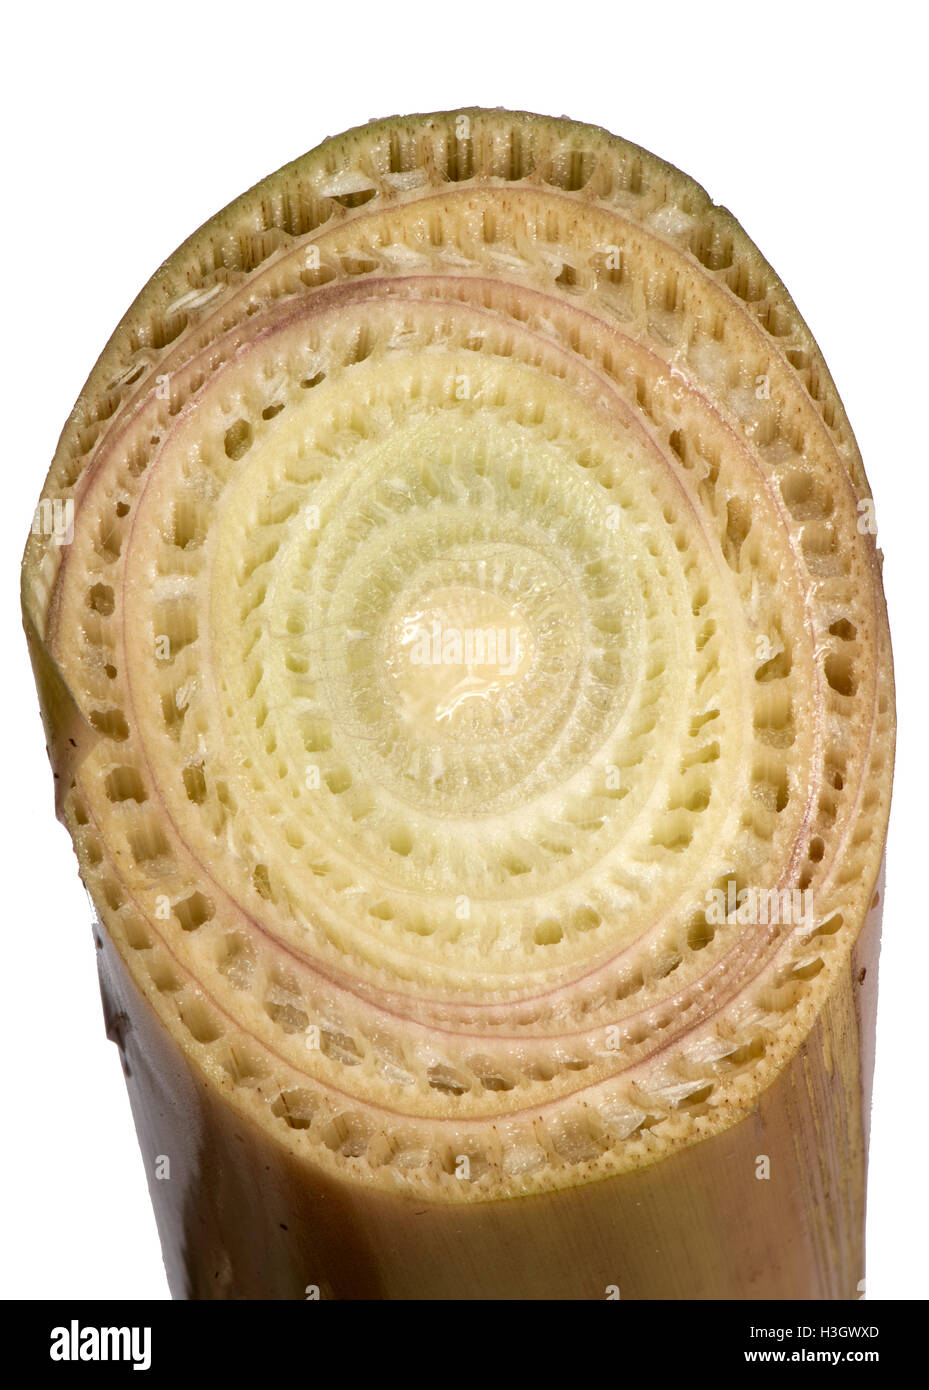 Section through the pseudostem of a banana showing tightly packed leaves that form the structure Stock Photo